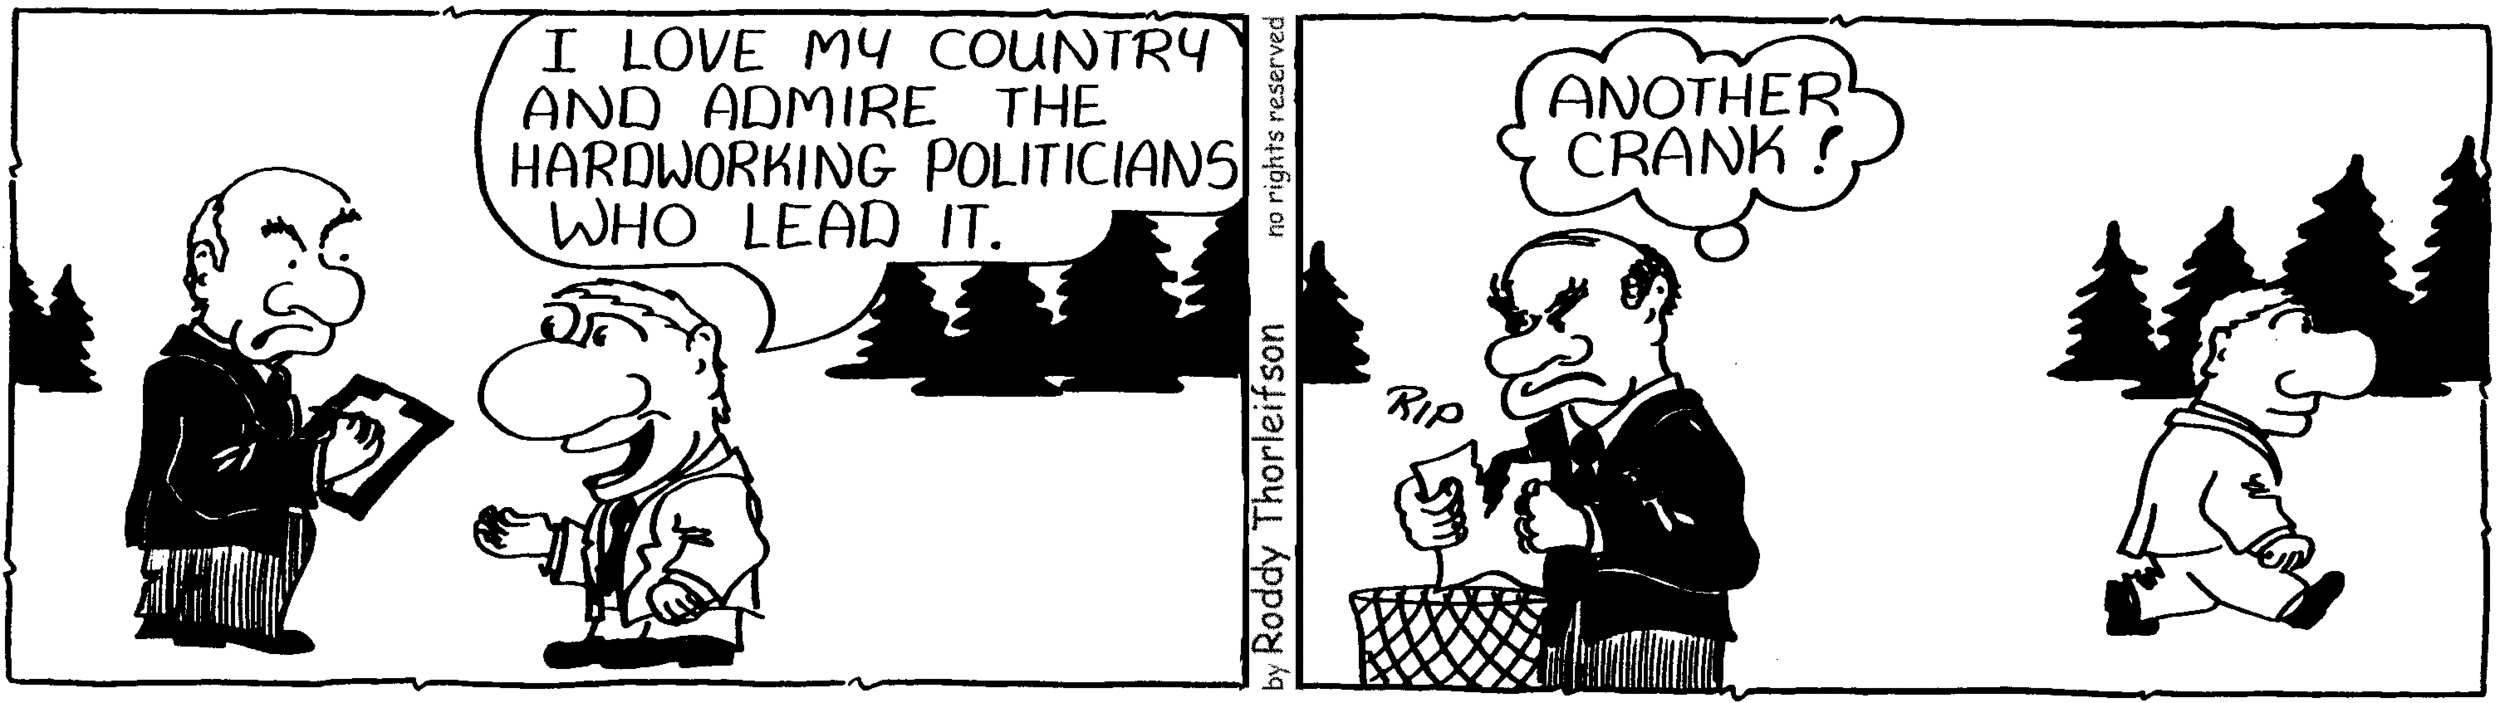 cartoon about polls and love of country